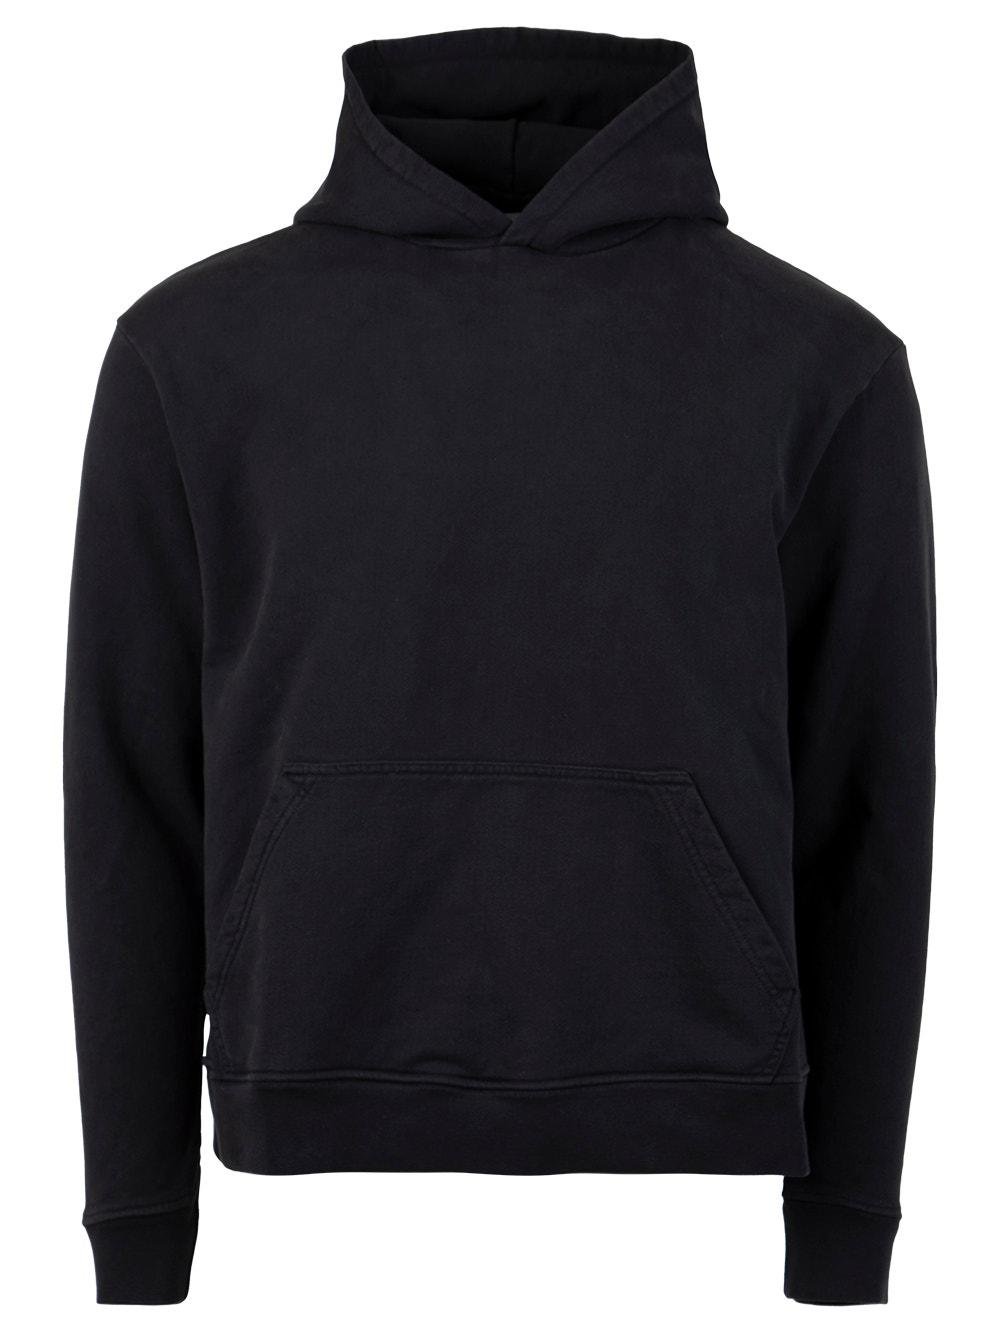 Houston Hoodie Black by AARON YOUNG